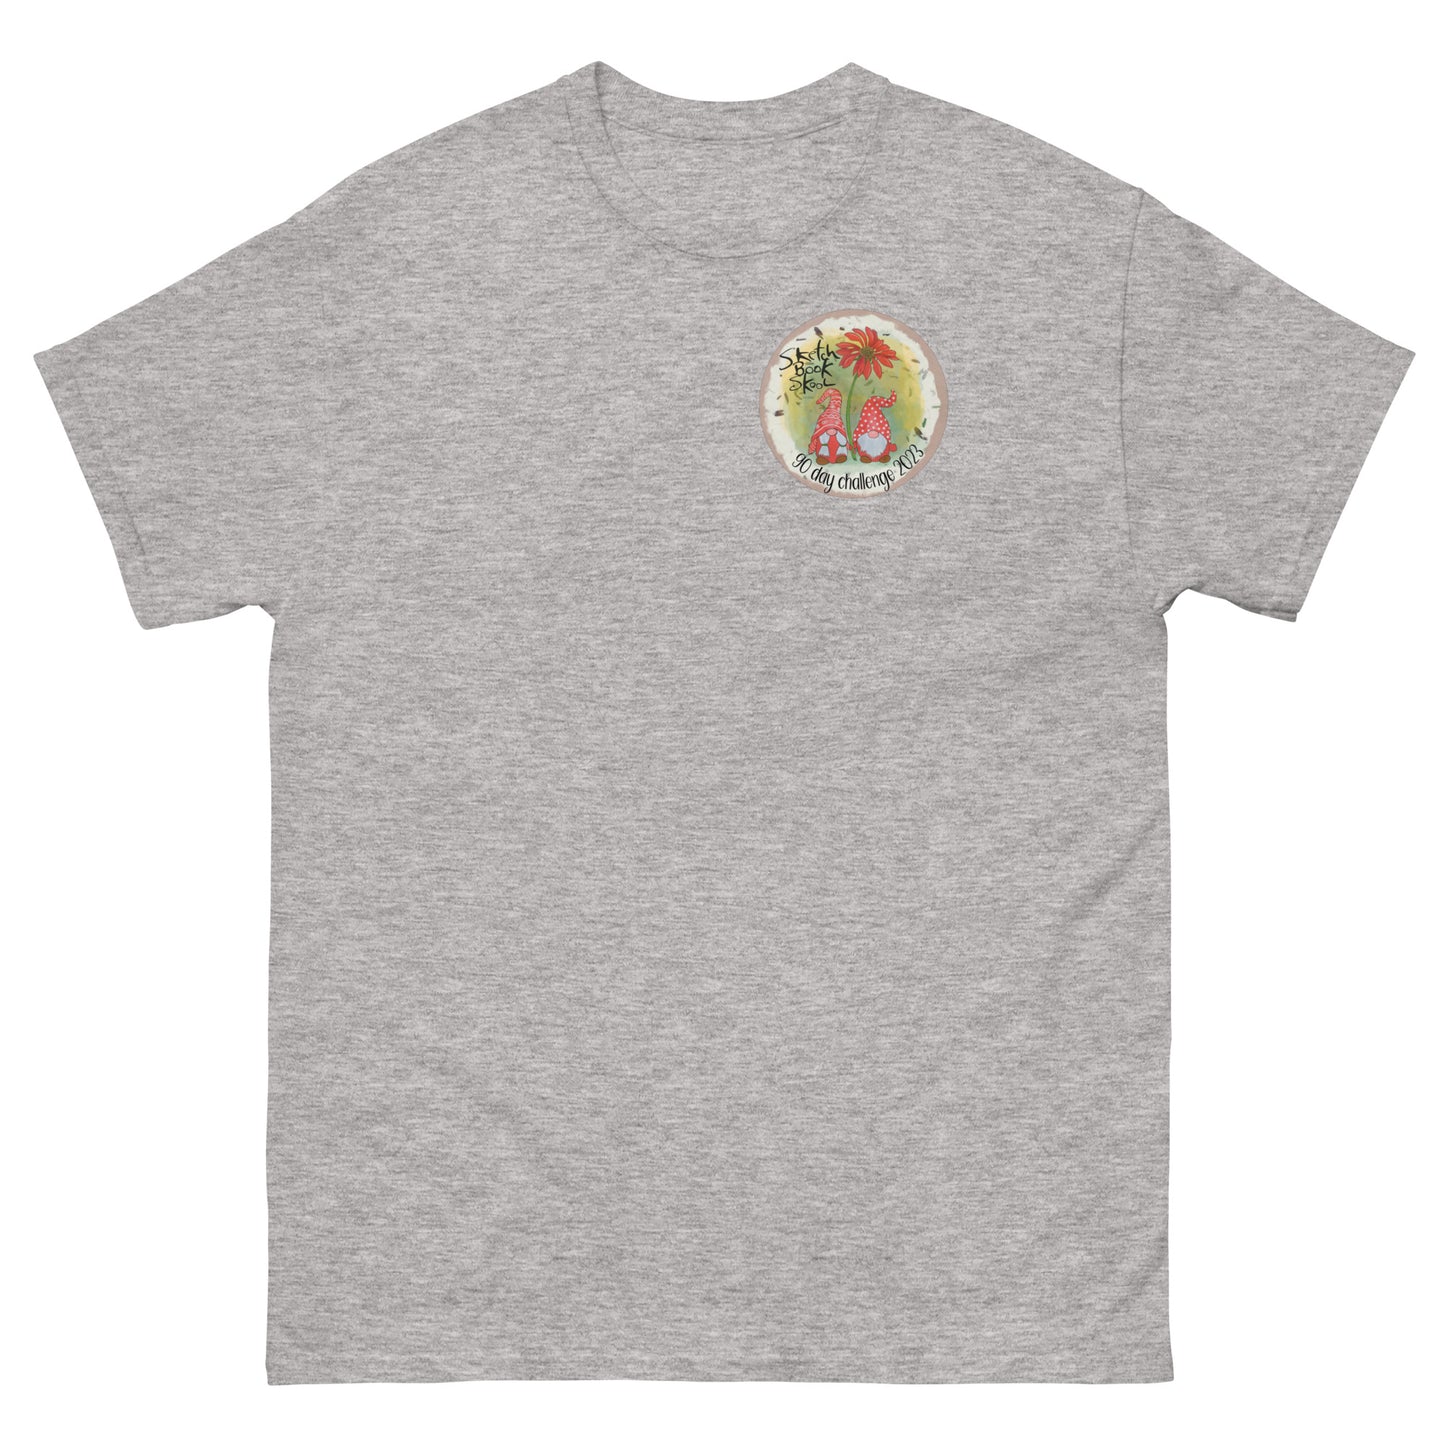 90 Day Challenge Gnome classic tee